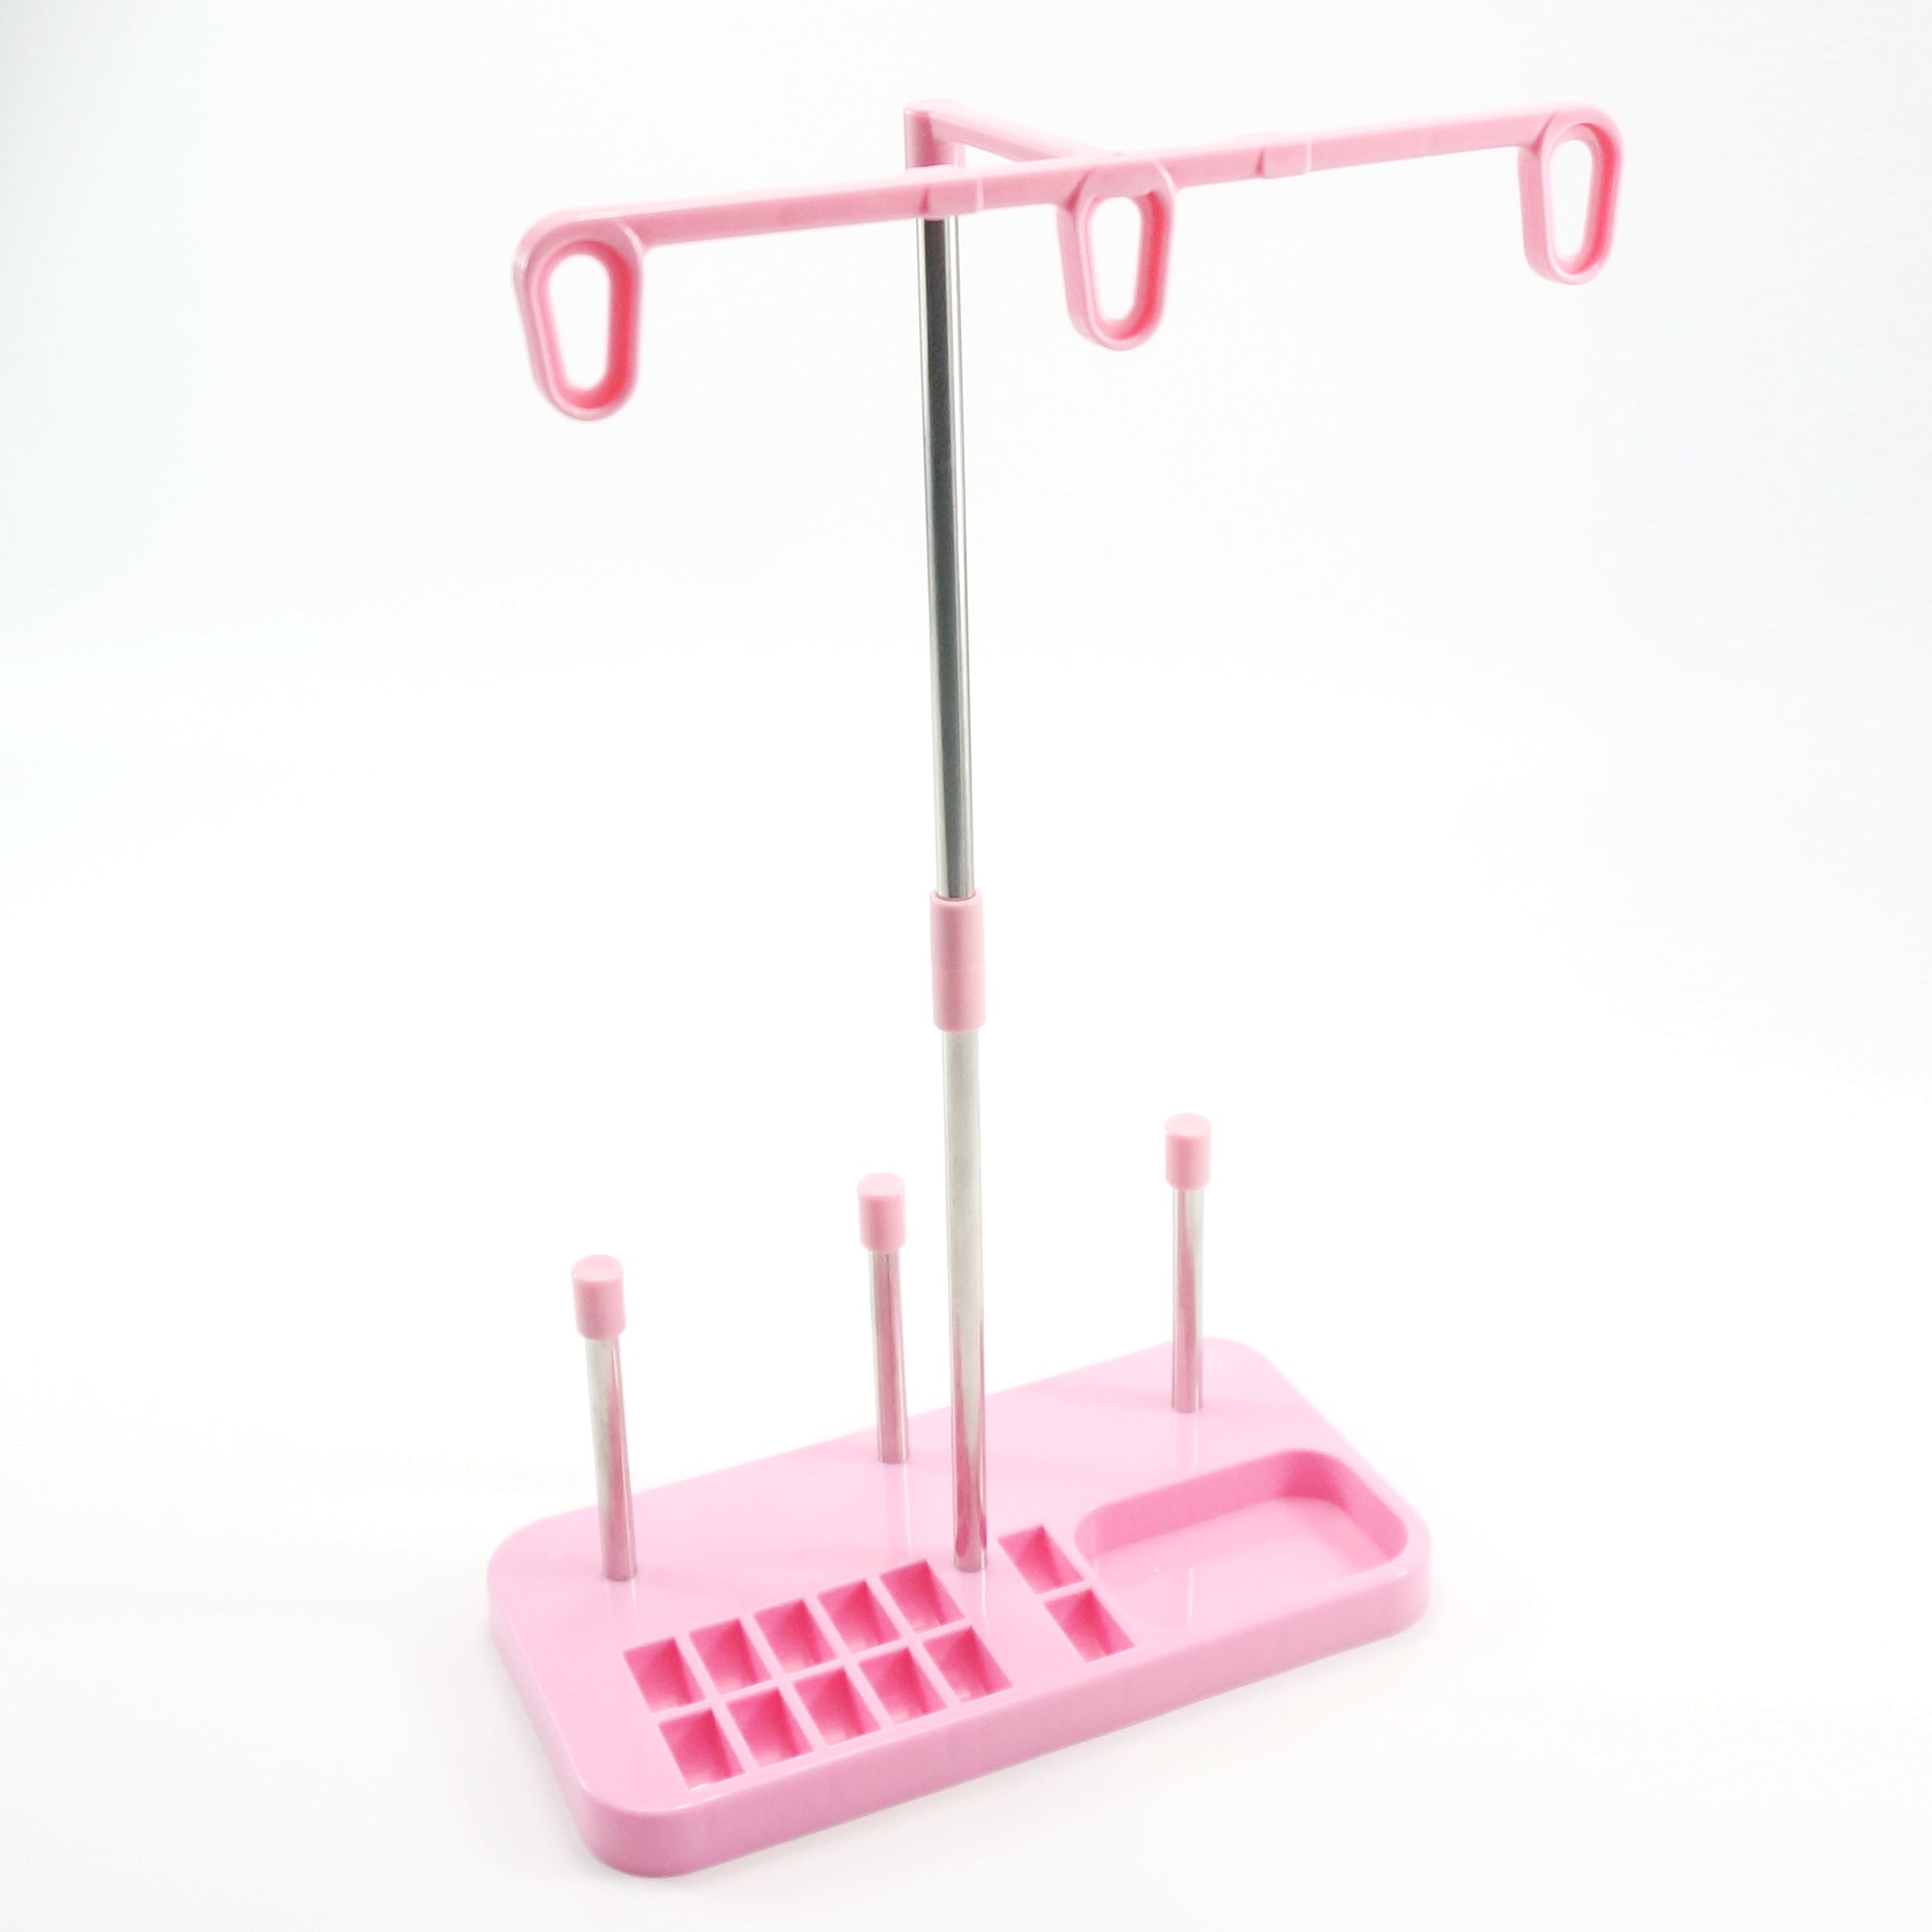 Sewing Machine Thread Stand Floss Bobbins Embroidery Bobbins Thread Holder,  Thread Spool Holder Plastic Aluminum for Sewing Pink